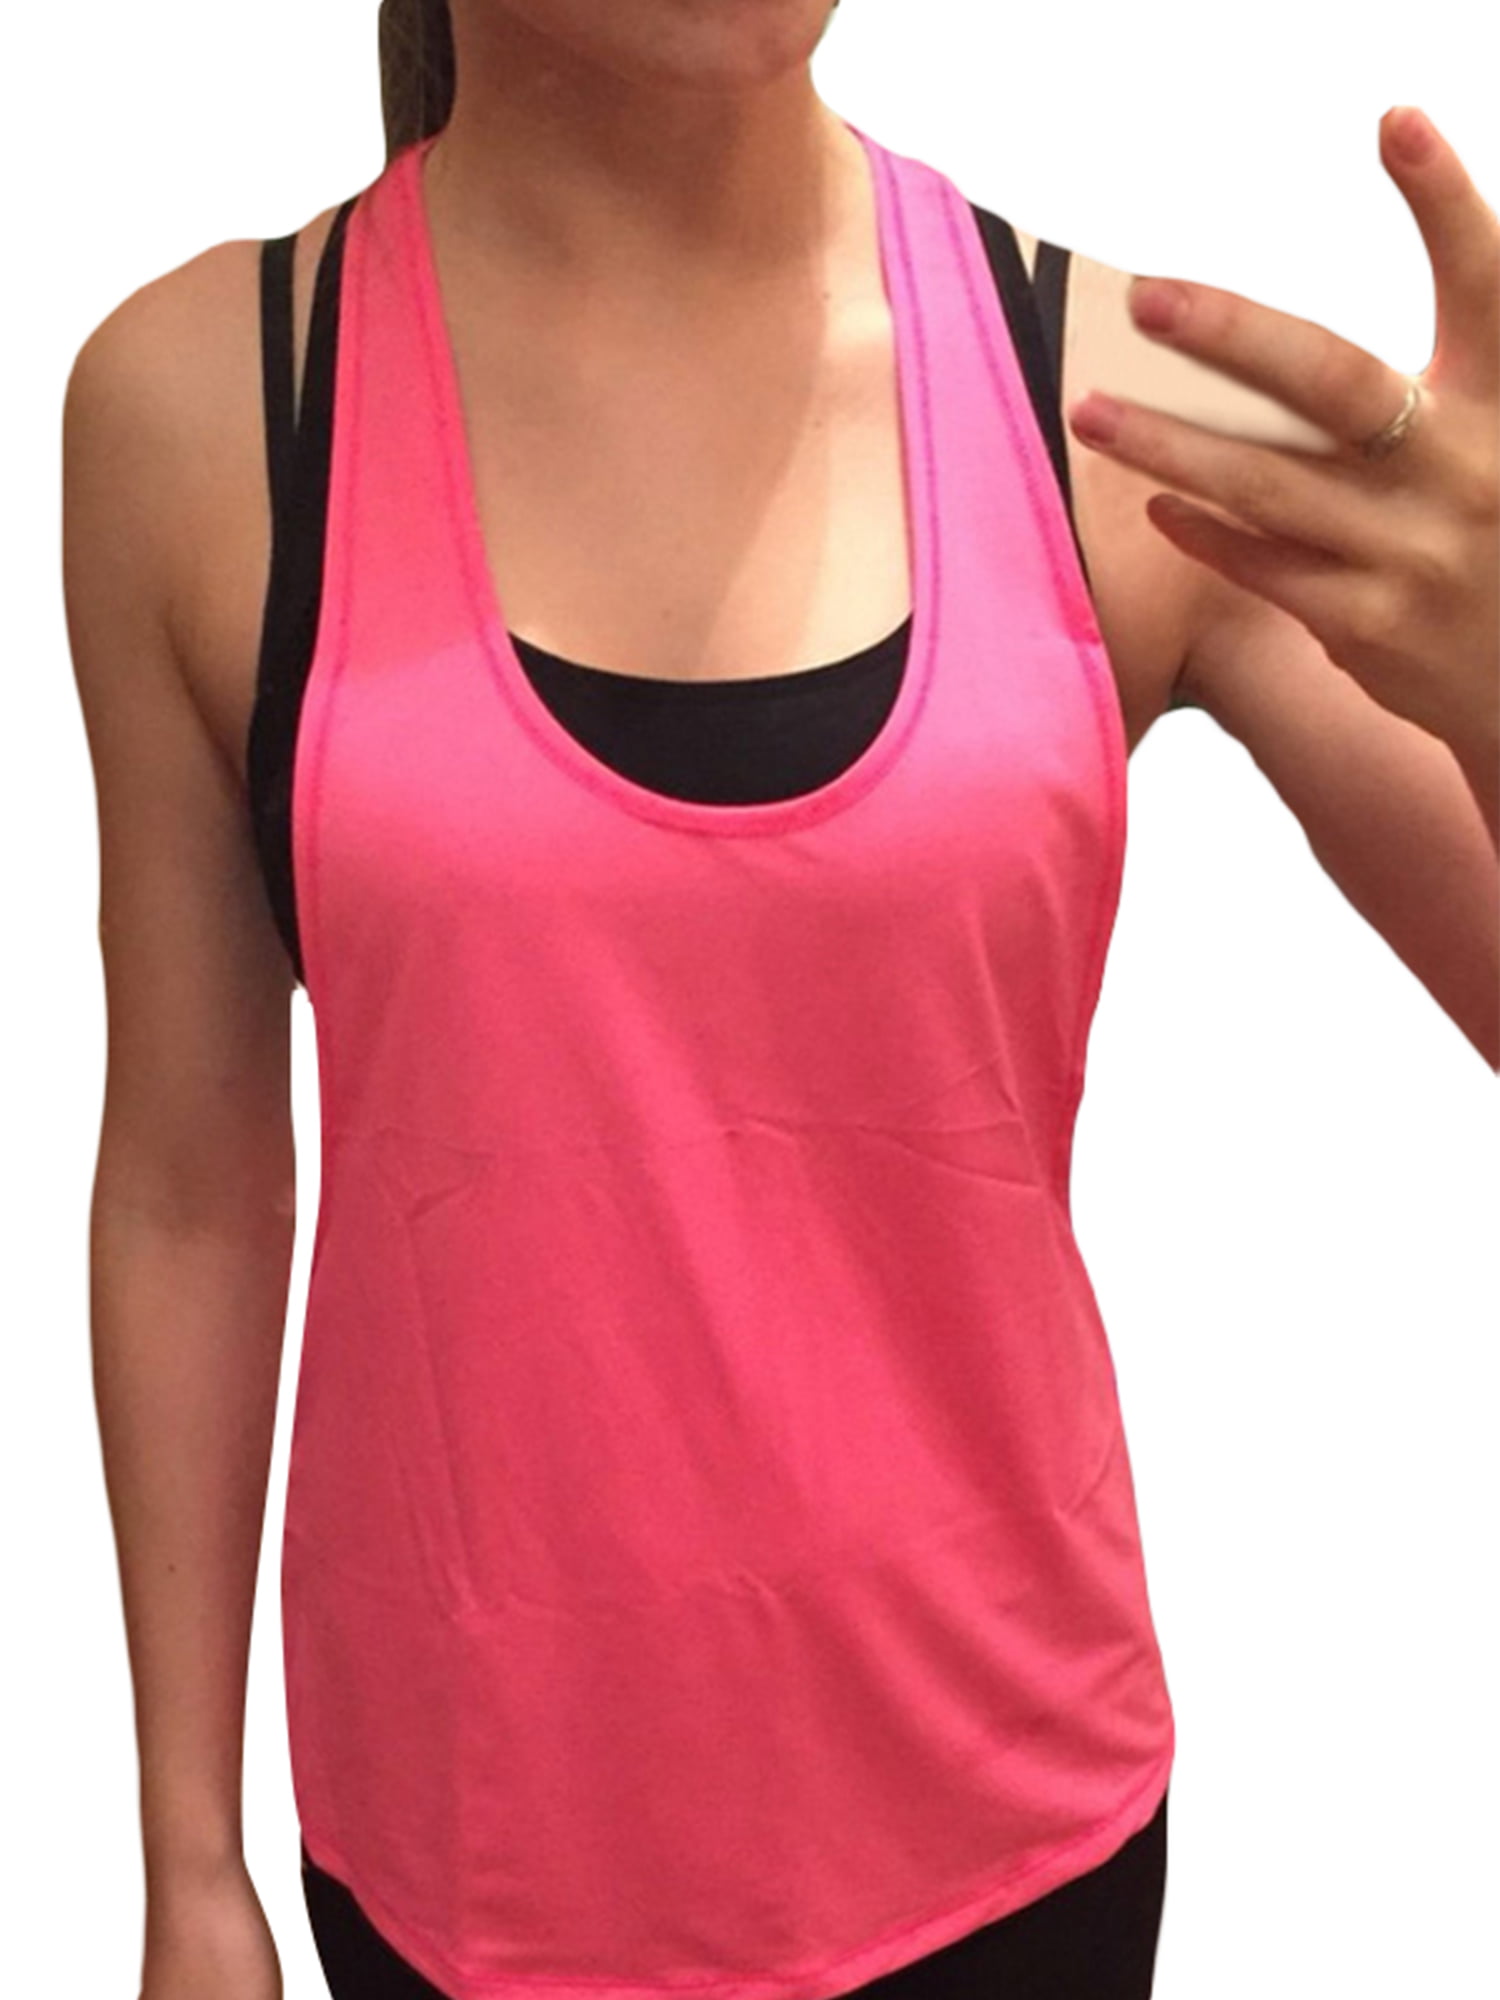 Womens Tank Tops Workout Tanks Gym Tops Mesh Yoga Tops Fitness Shirt Running Exercise Clothing Athletic Tee